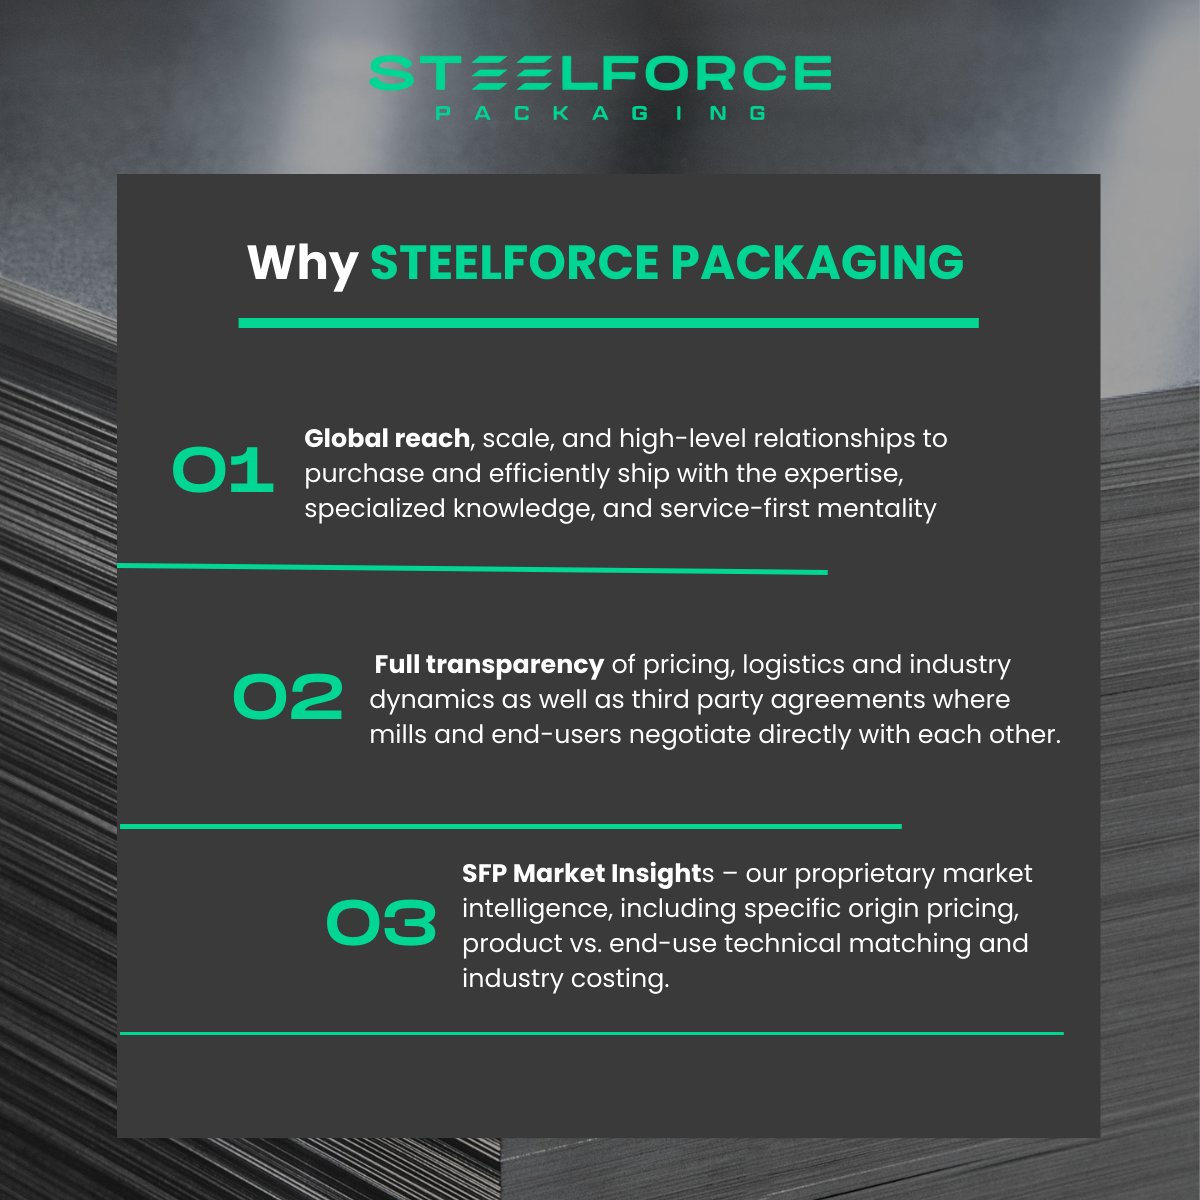 Choose Steelforce Packaging as Your Go-To Steel Trading Company Find out more about our company, products and services at lnkd.in/gUUq9kkn . . #Steelforce #packaging #trading #steel